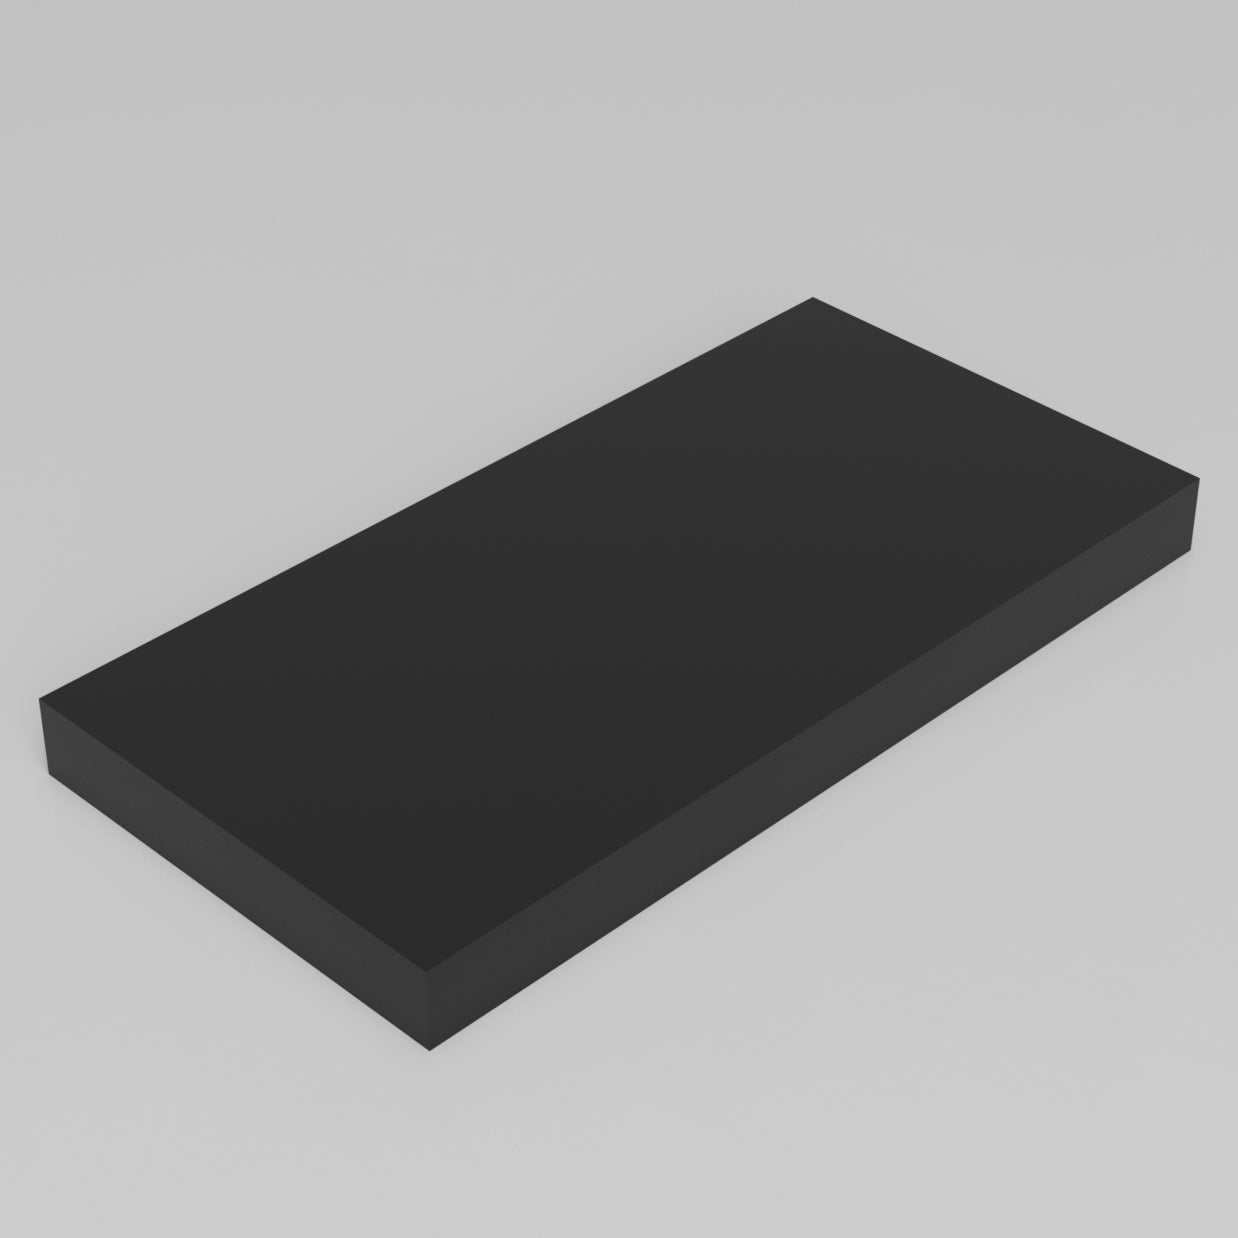 Machinable Wax Rectangular Block Front View 1 Inch by 6 Inch by 12 Inch